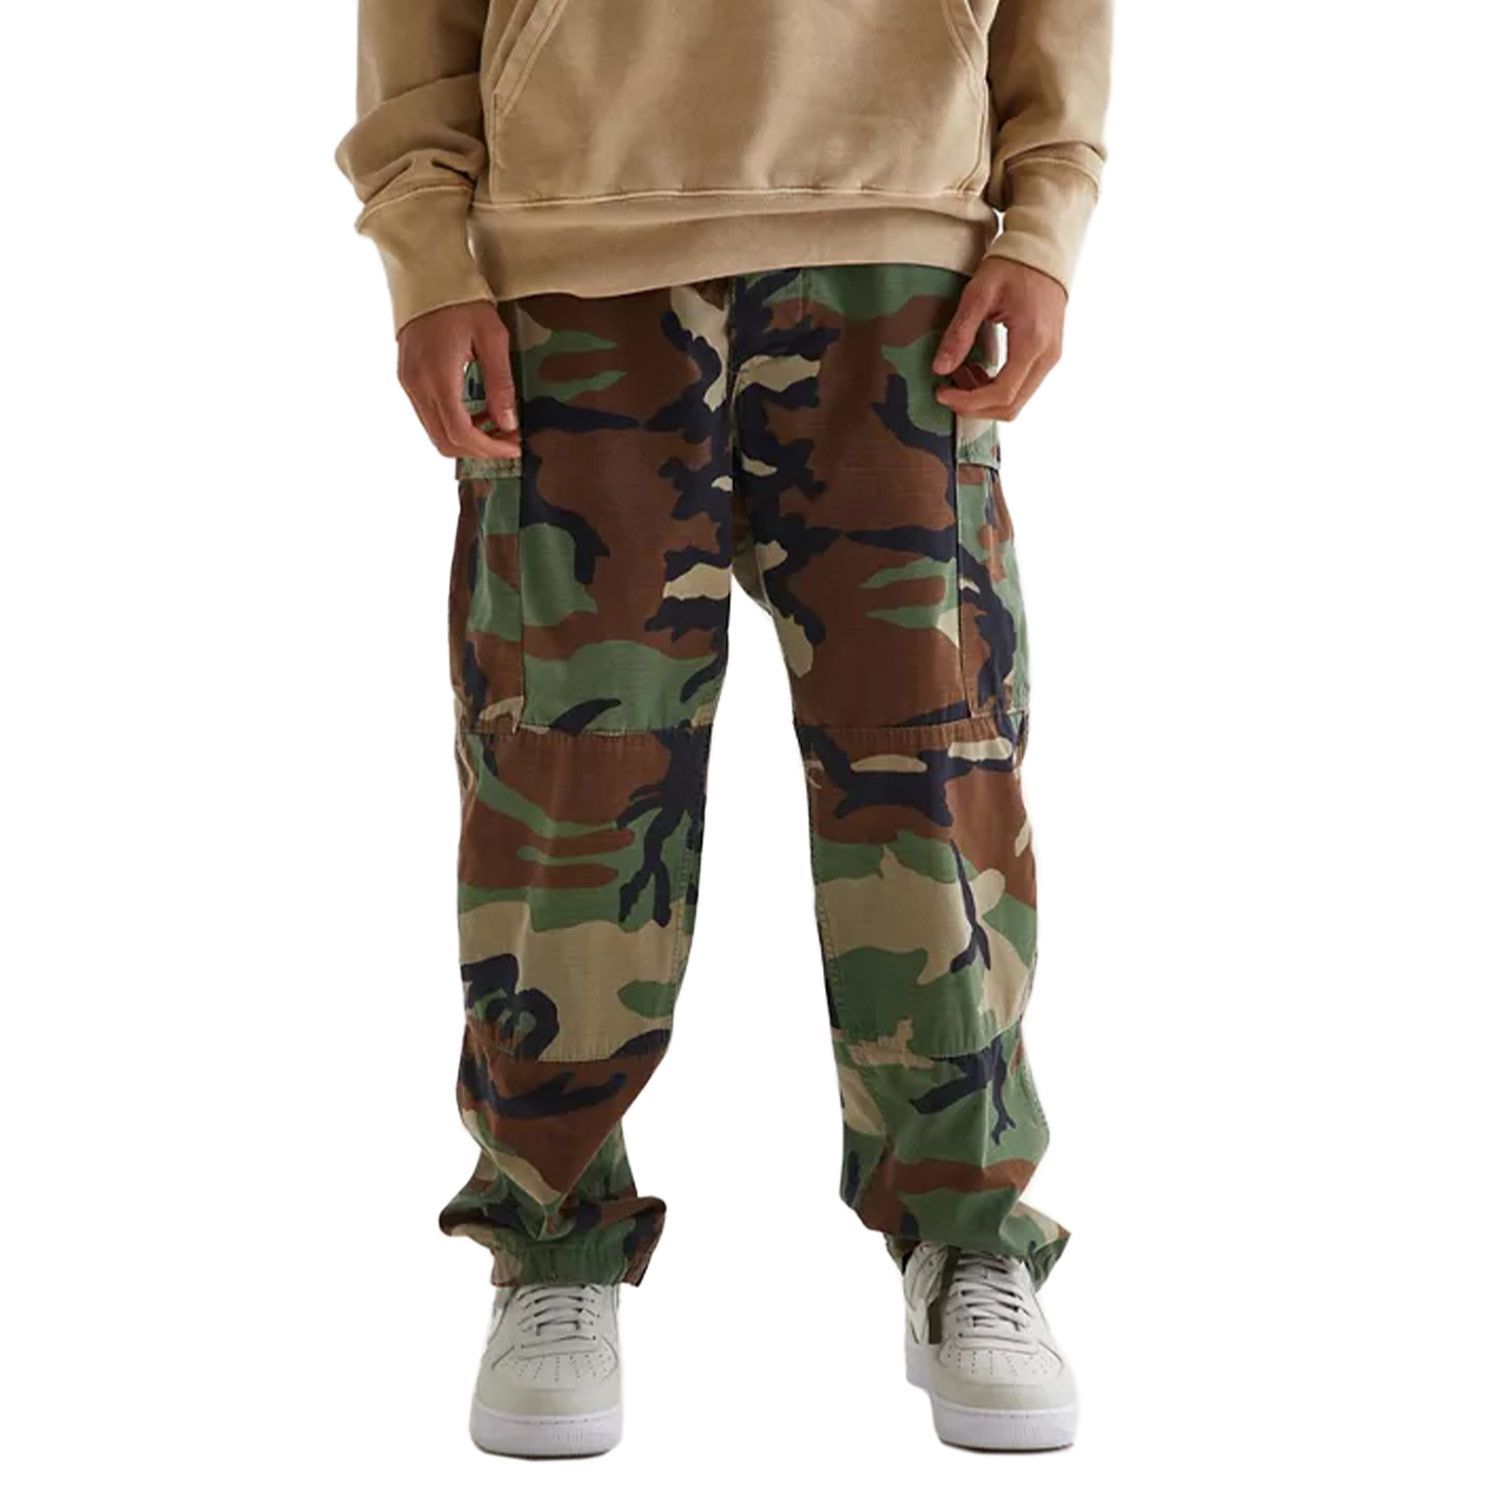 Neo Natives Full Length CamouflageArmy pattern Cord Closure Pants for  boysgirlsOlive